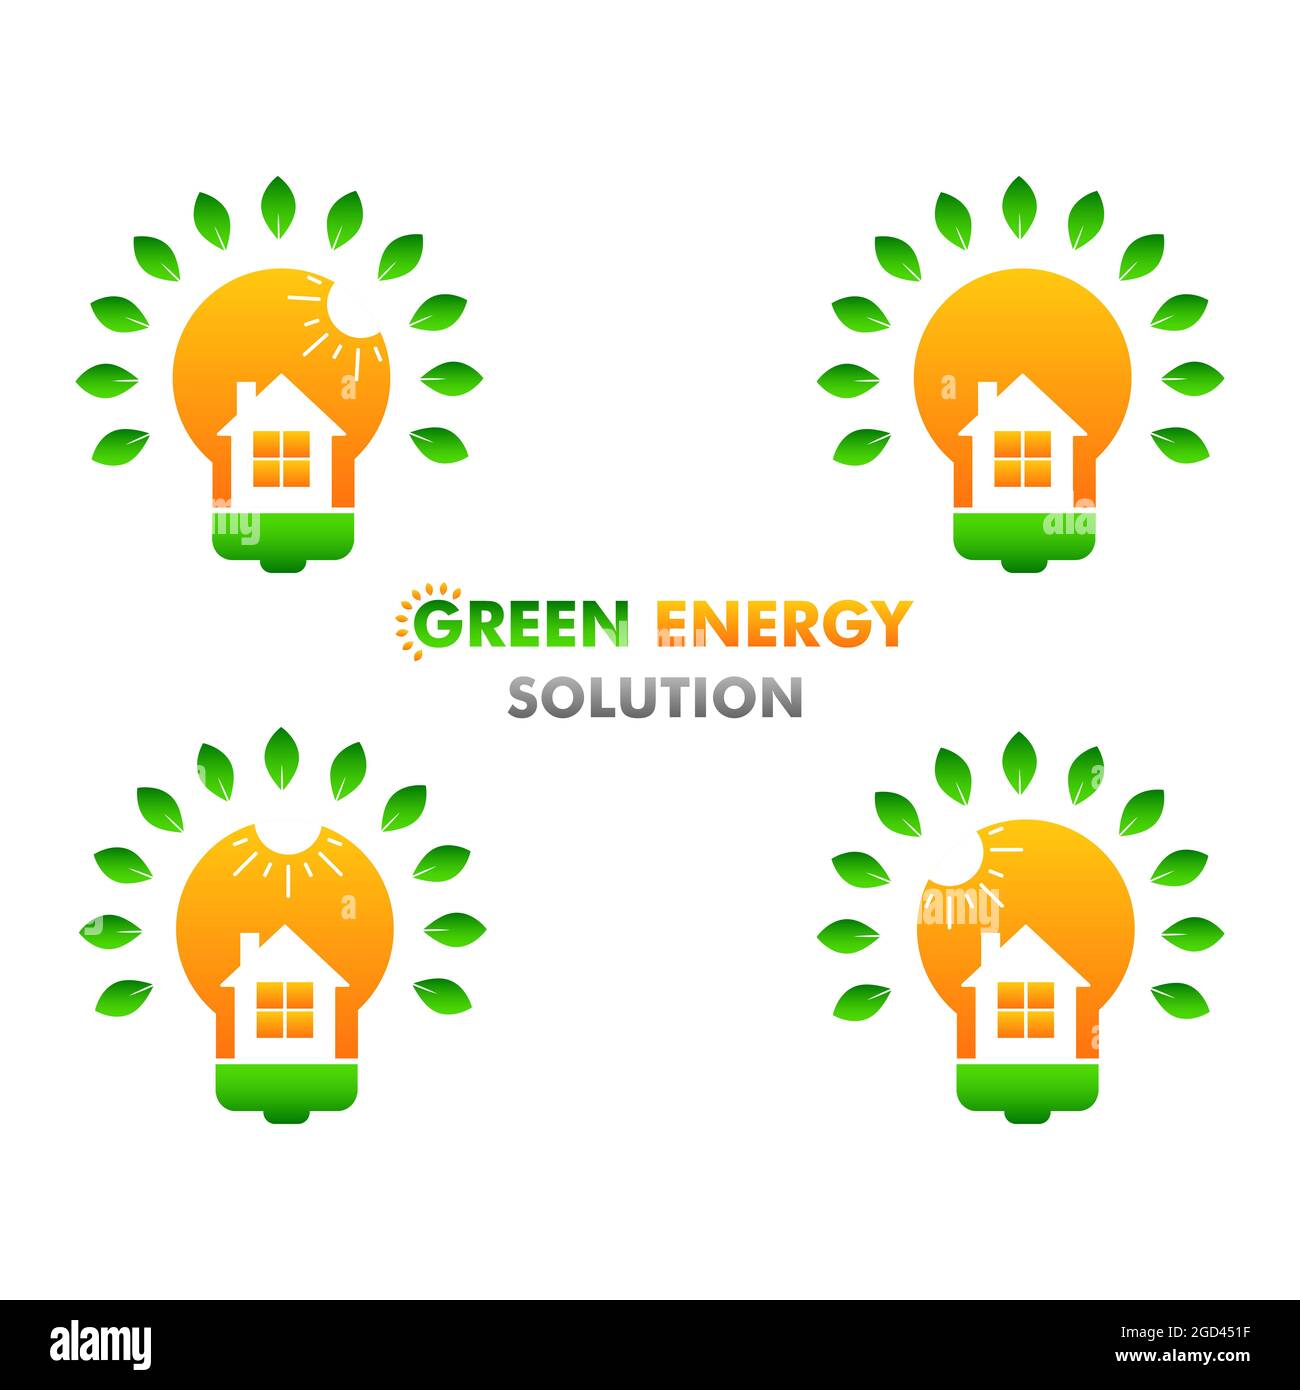 green energy illustration. renewable and clean energy illustration design concept. on white background Stock Photo